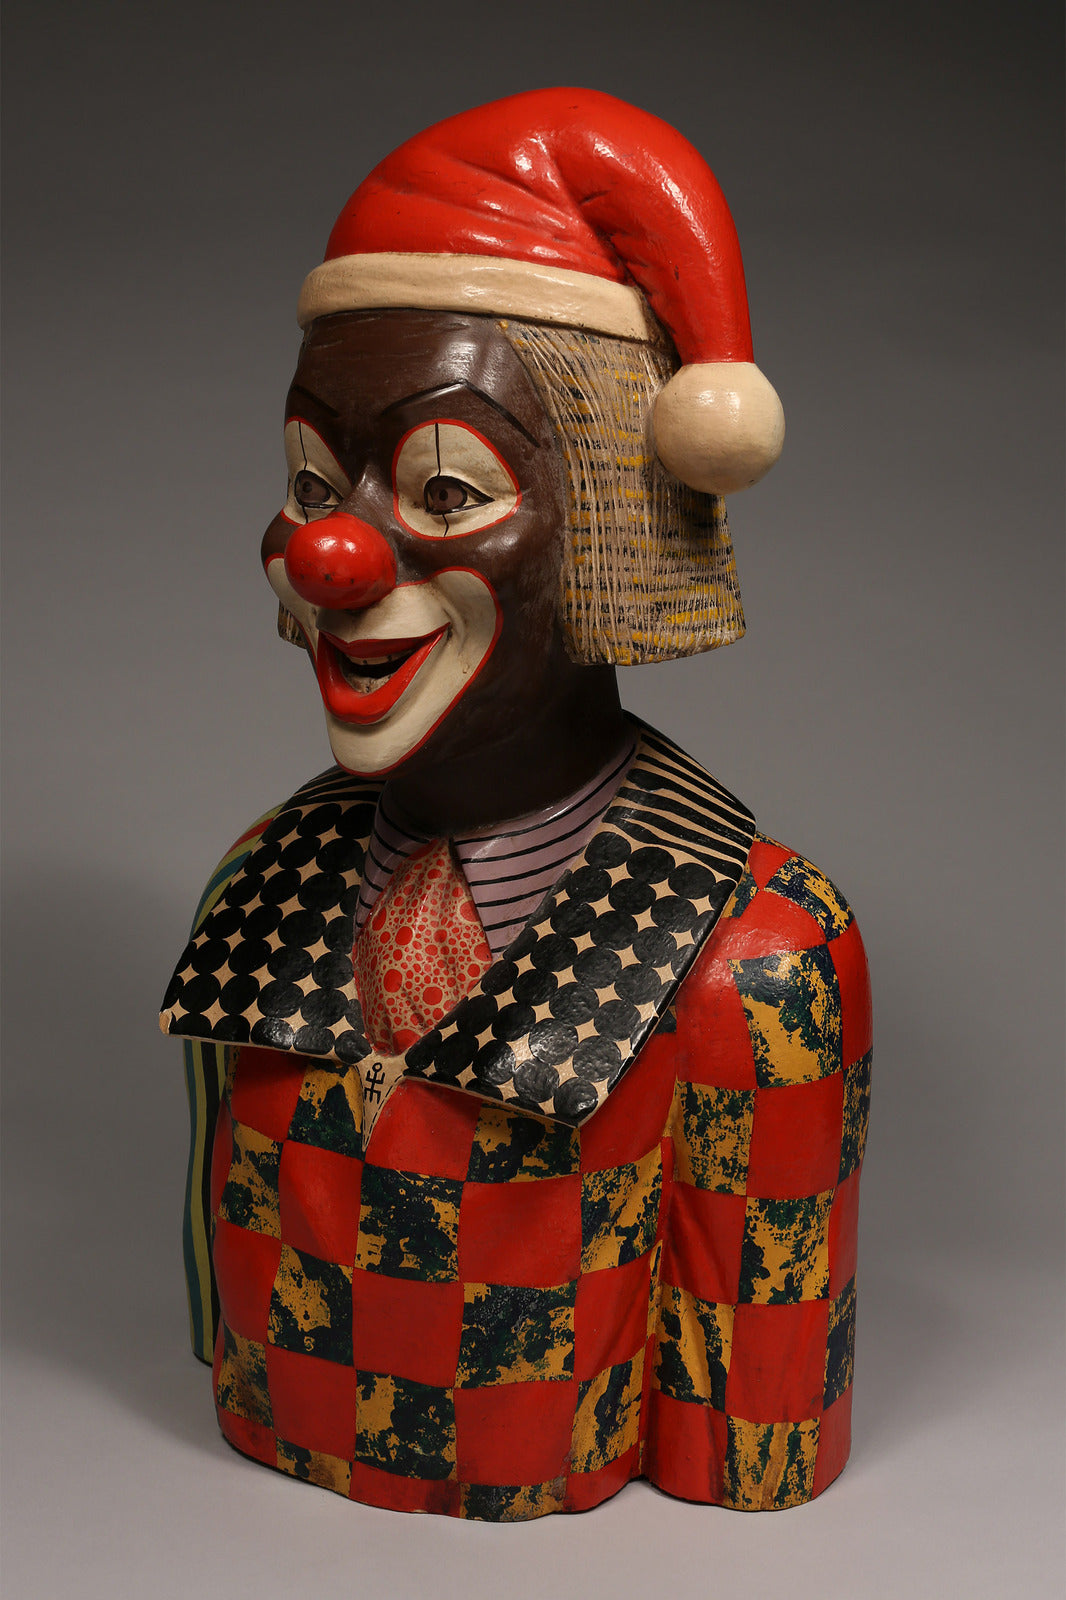 Handcrafted Sculptures - African Art - Home Decor - Wood - Statue - Figurine - Clown Santa - Painted